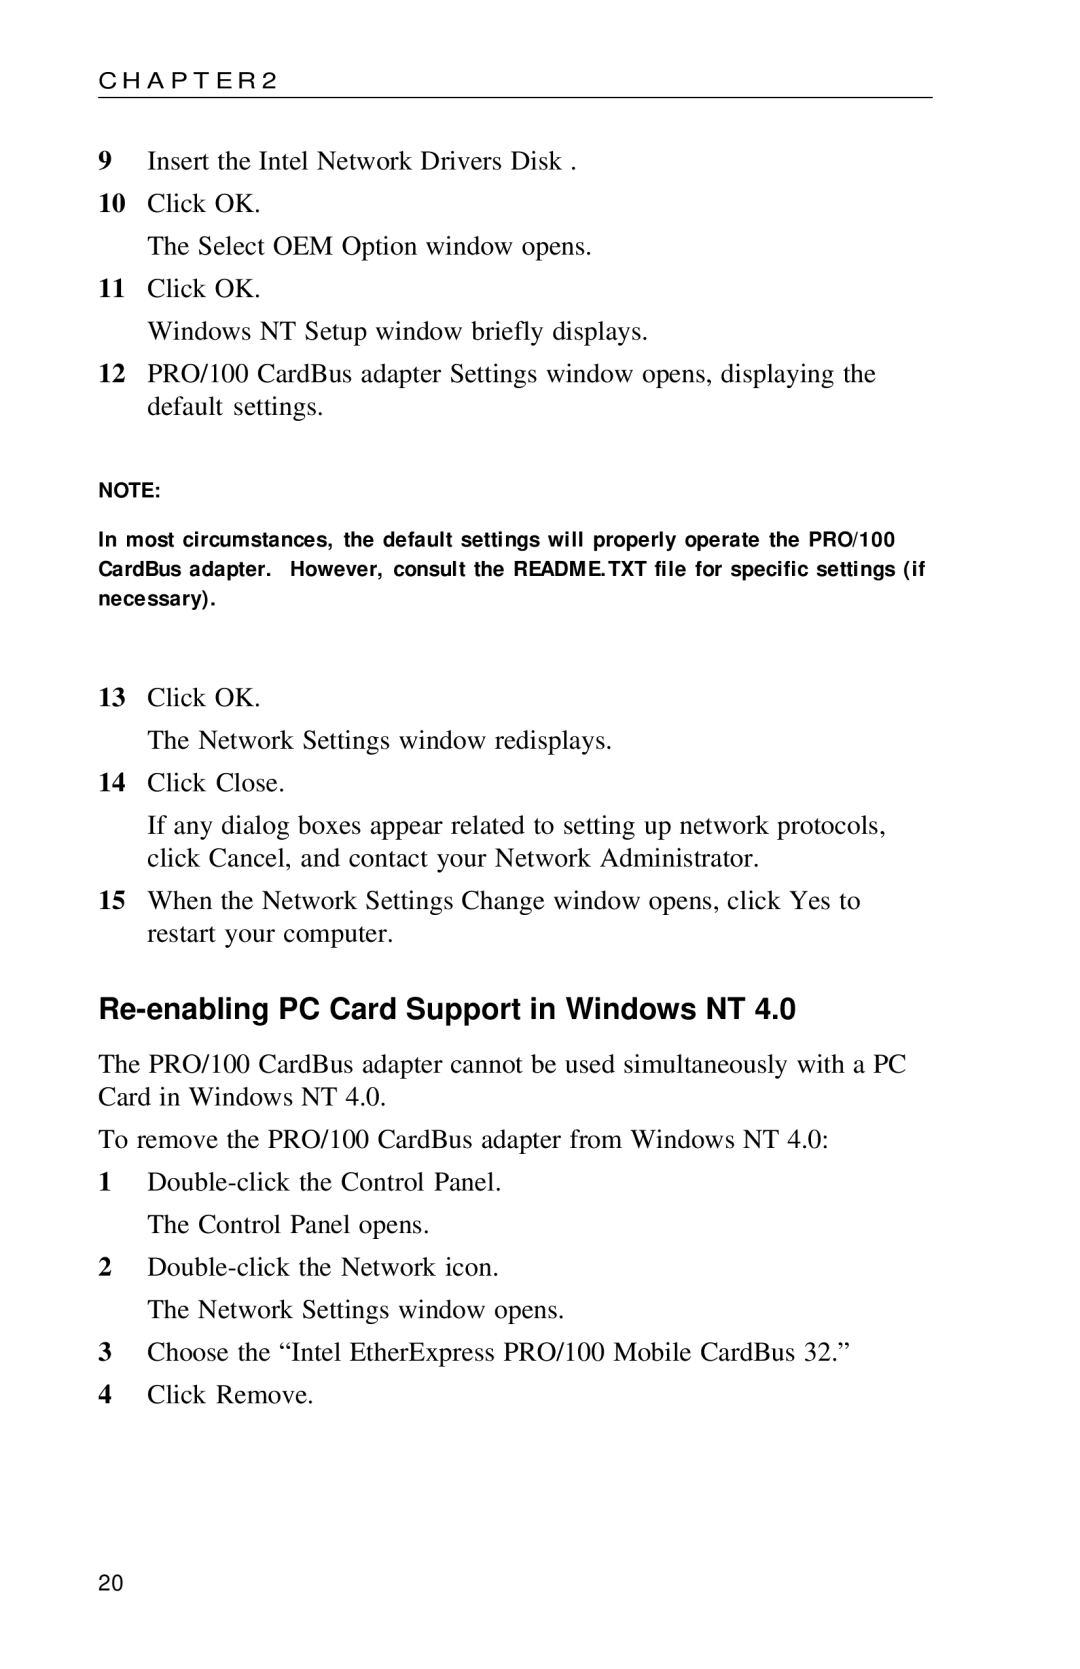 Intel PRO appendix Re-enabling PC Card Support in Windows NT 